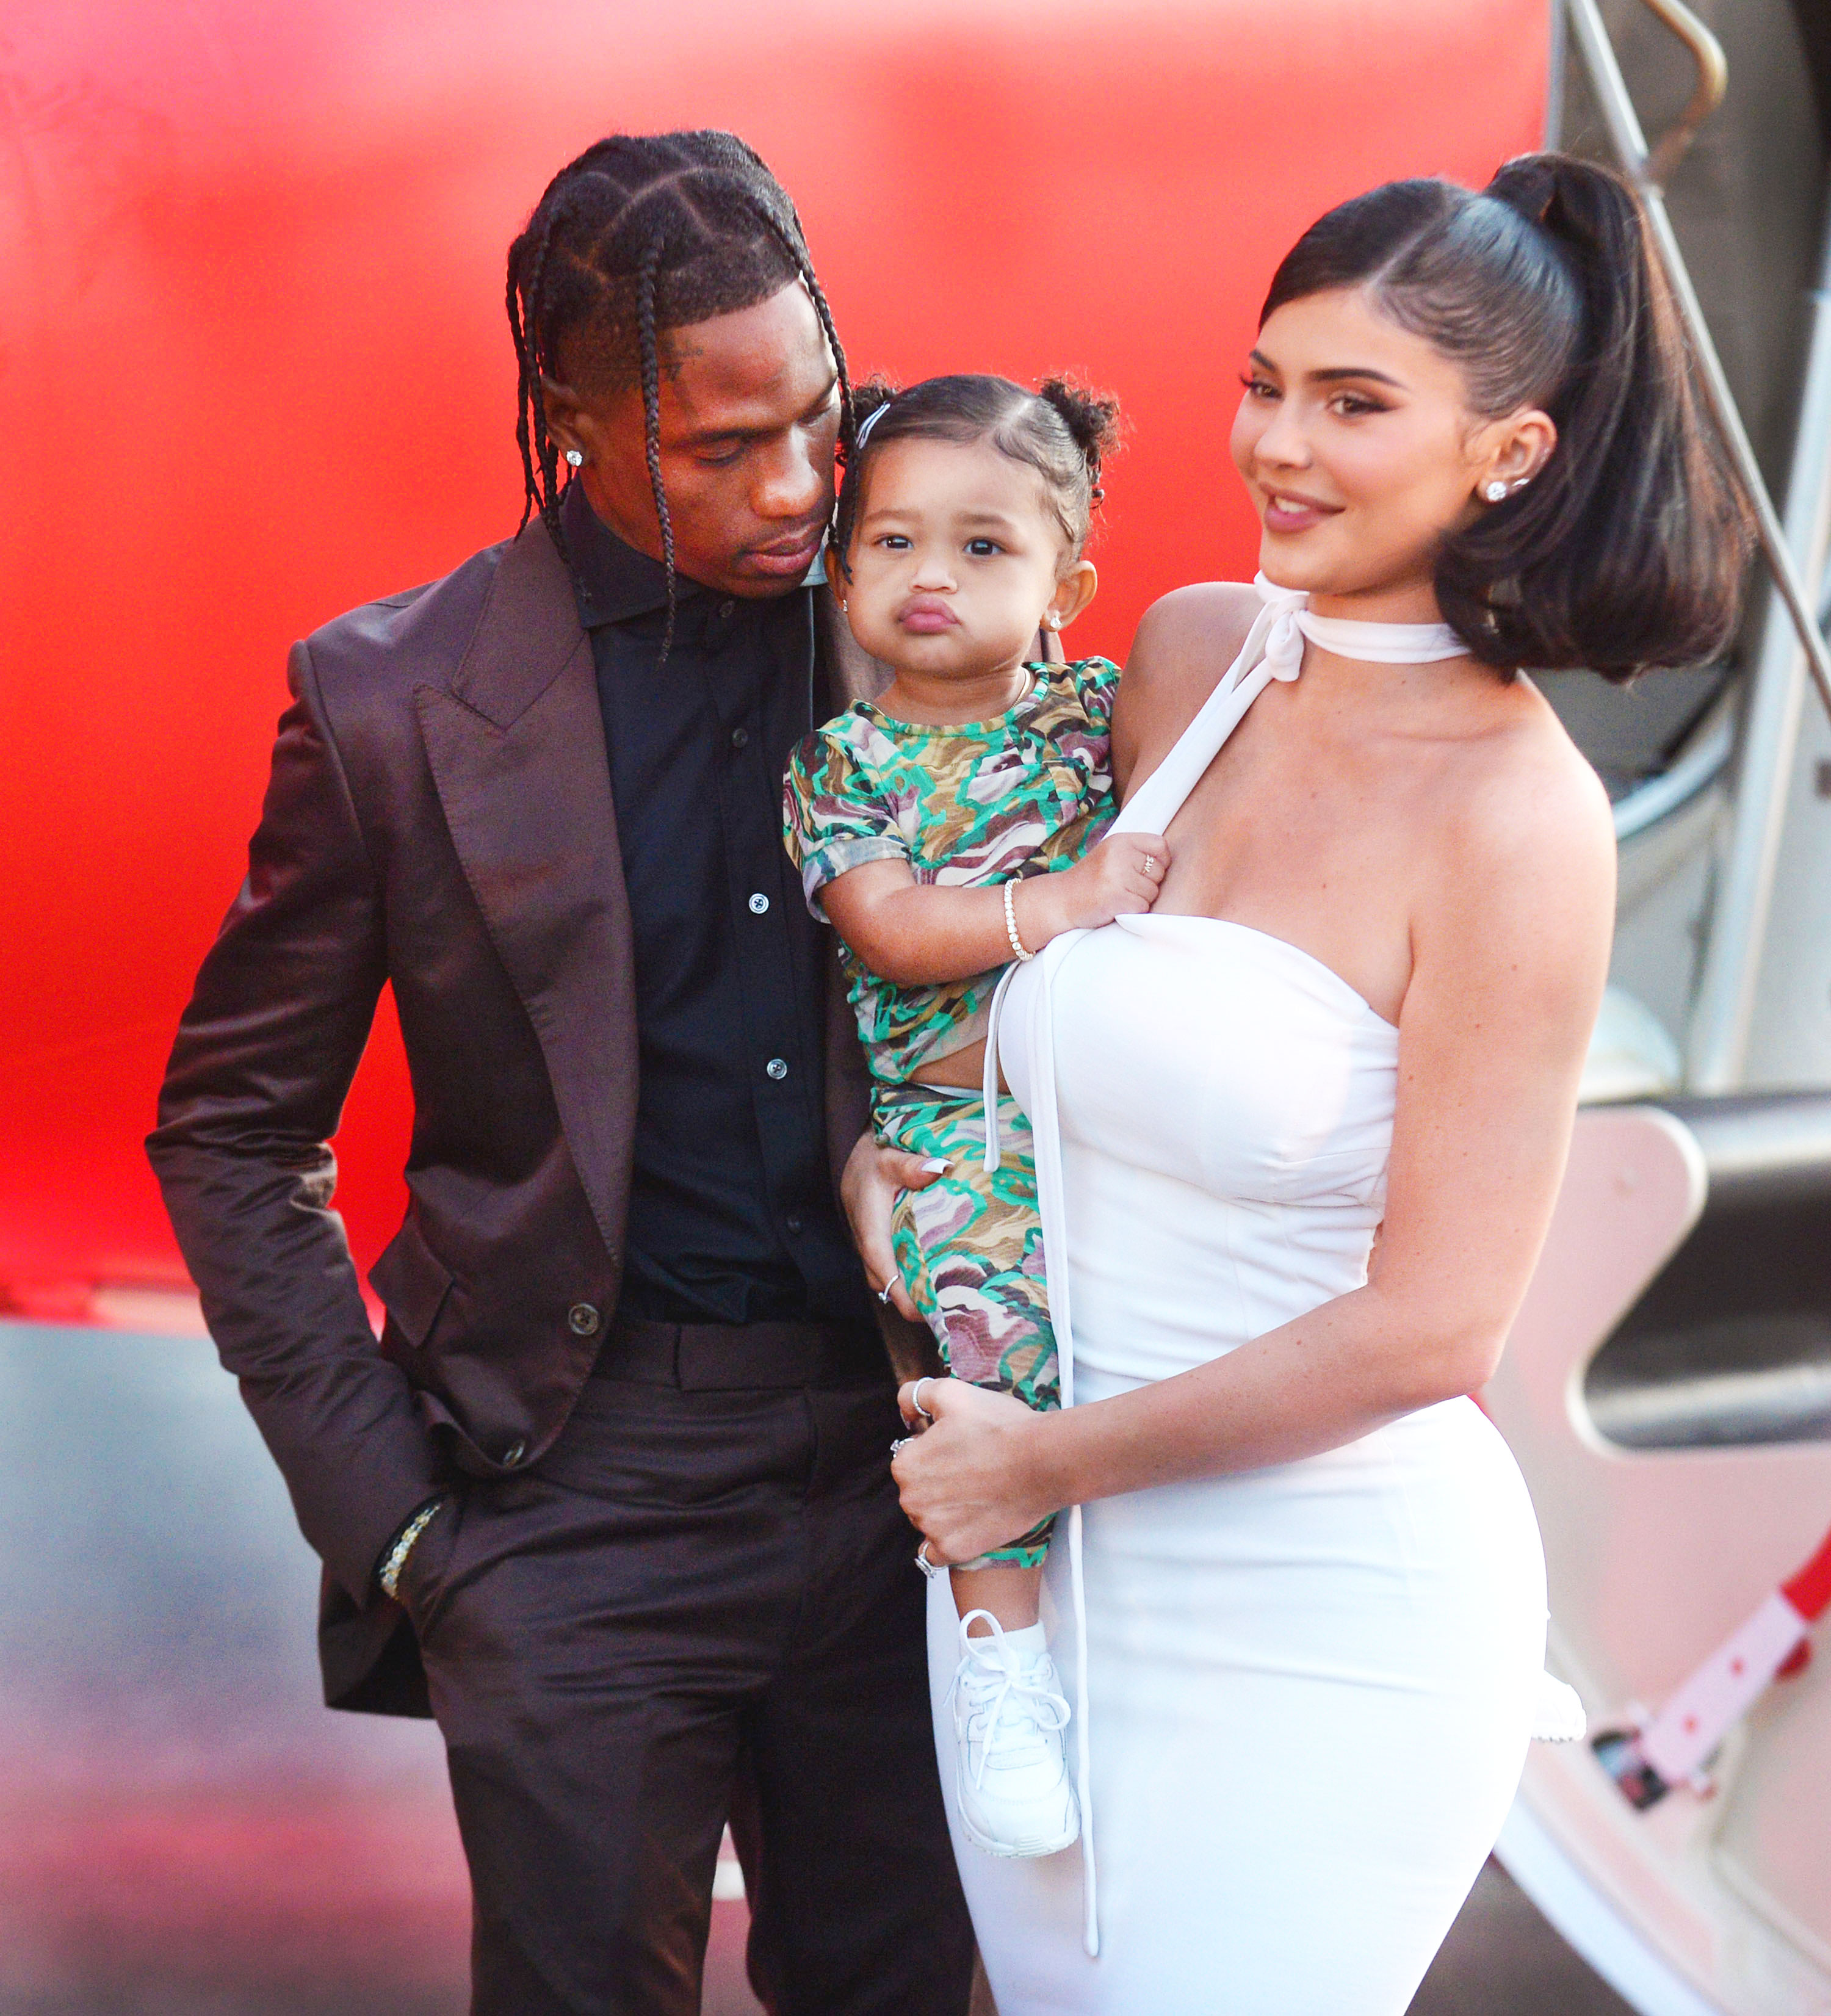 Travis Scott Hangs Out With Kylie Jenner, Stormi in Amid Quarantine